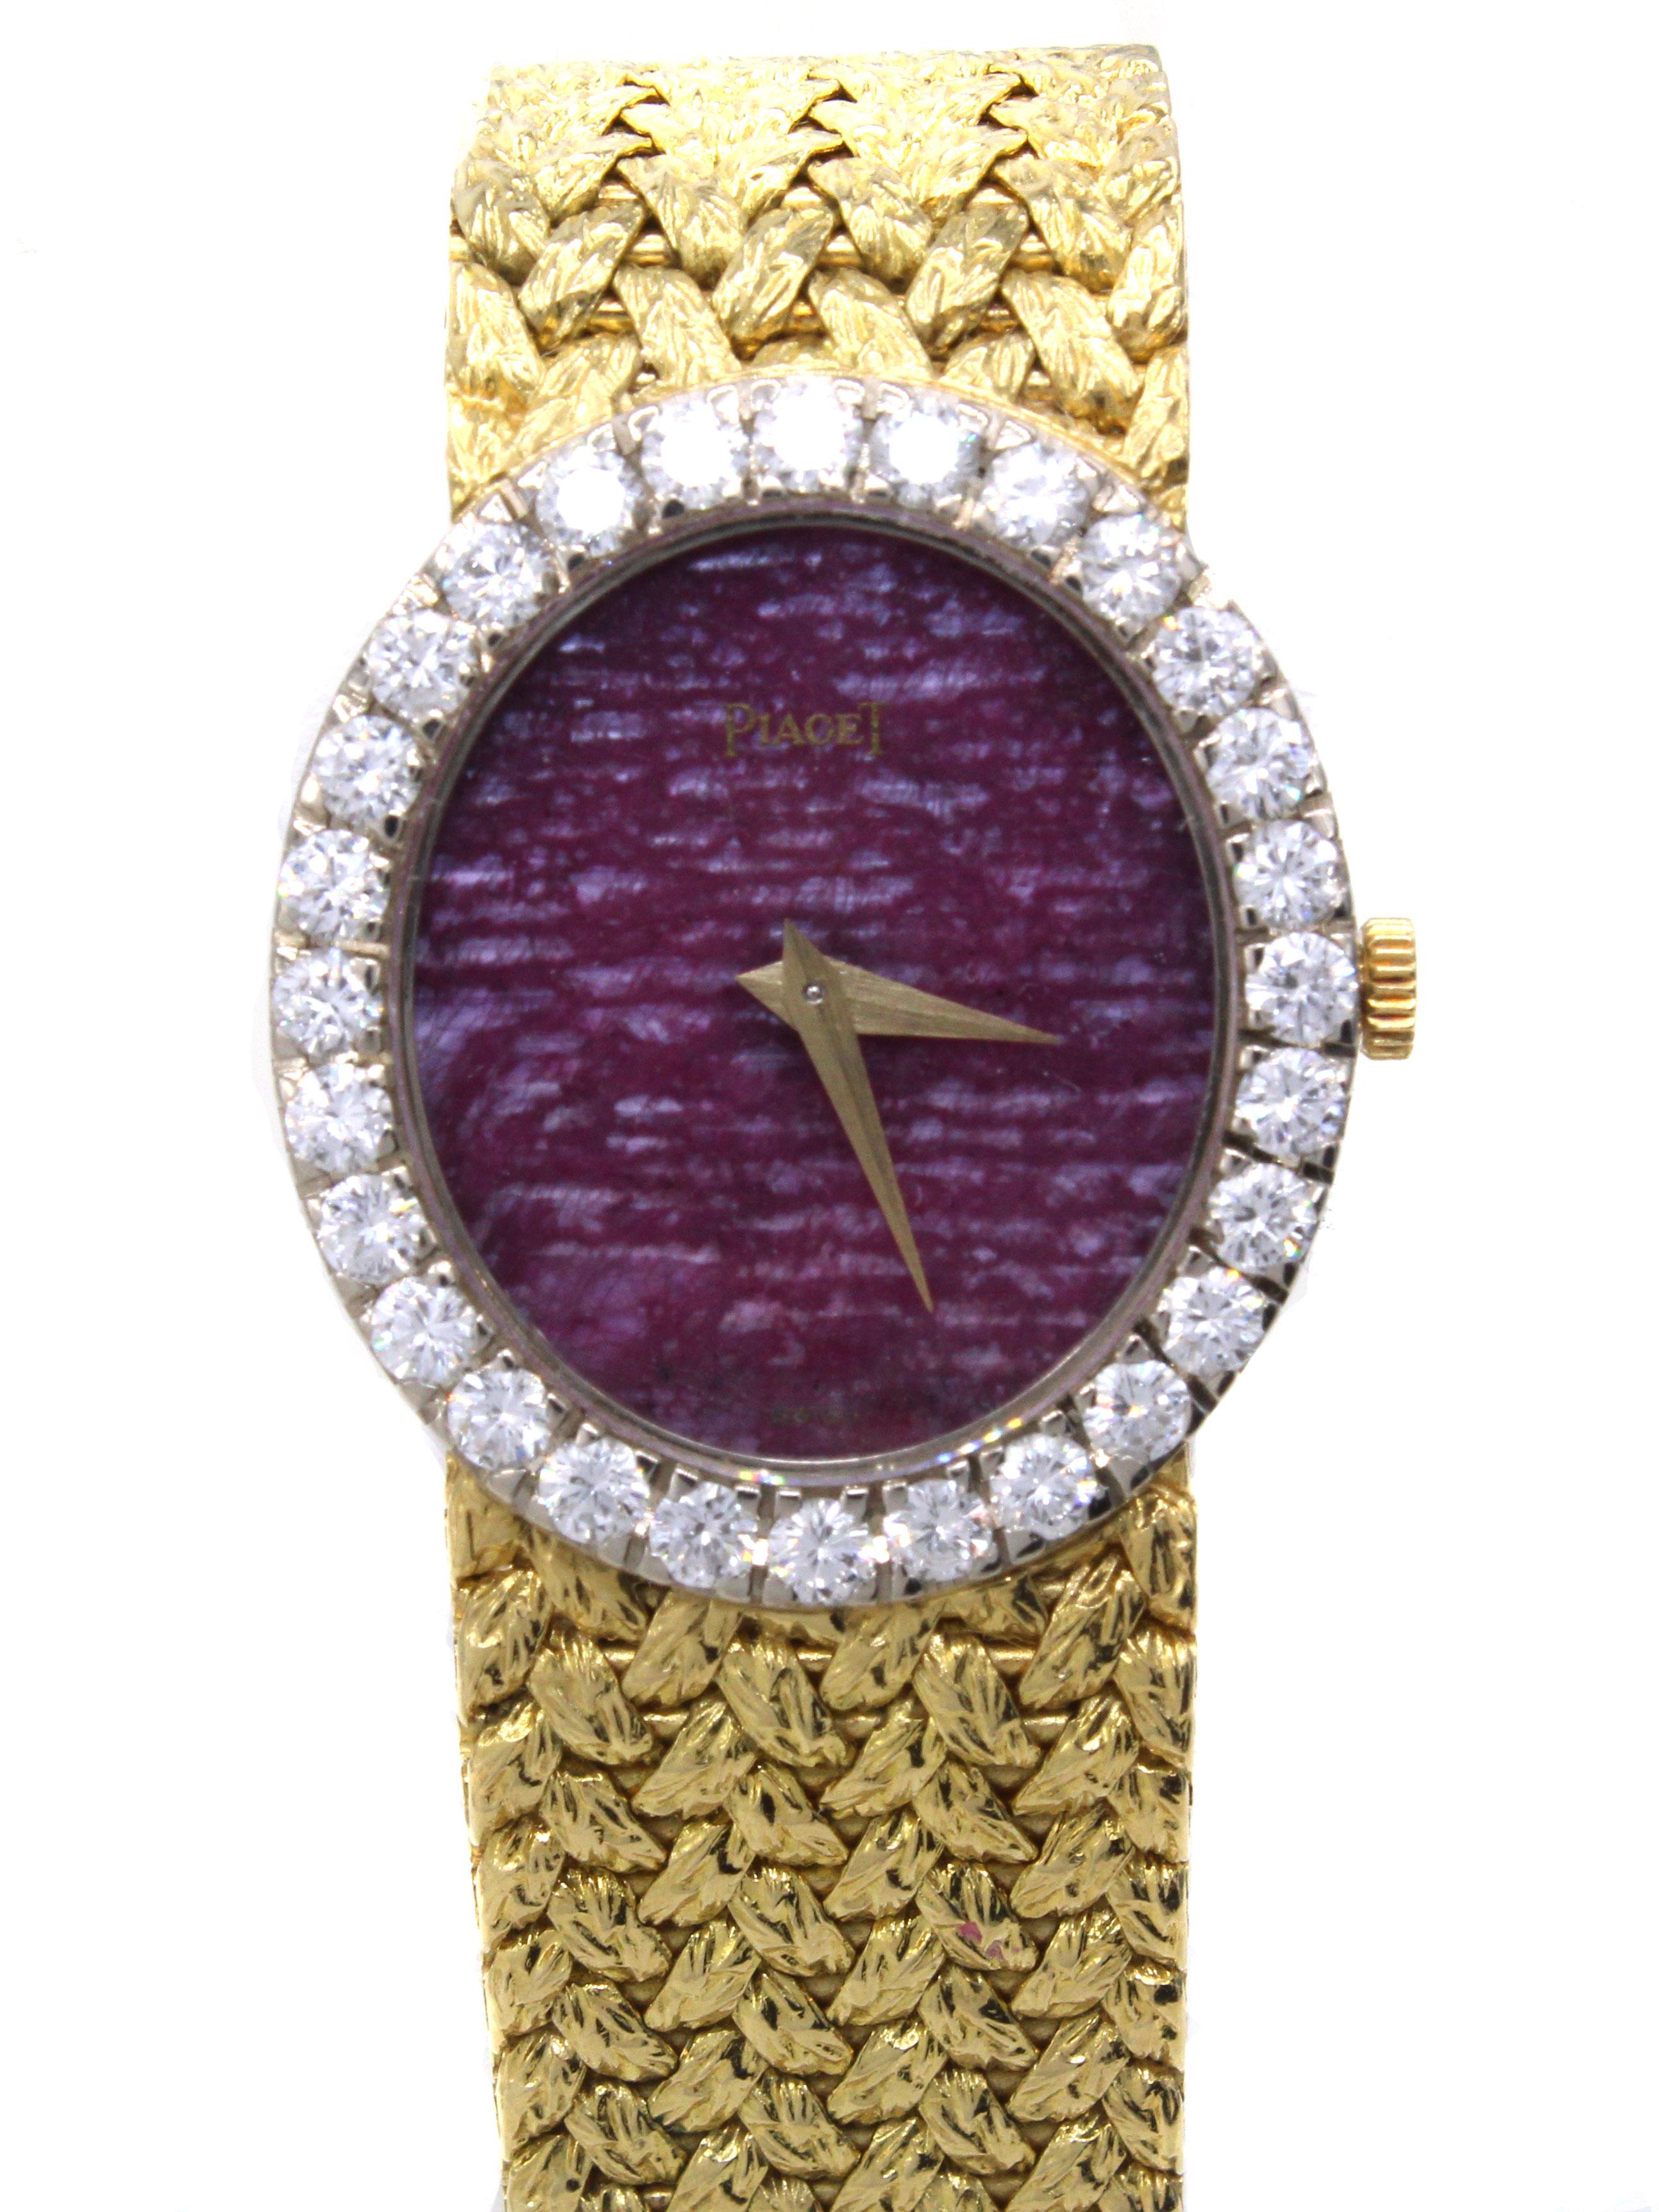 piaget ladies gold watch with diamonds